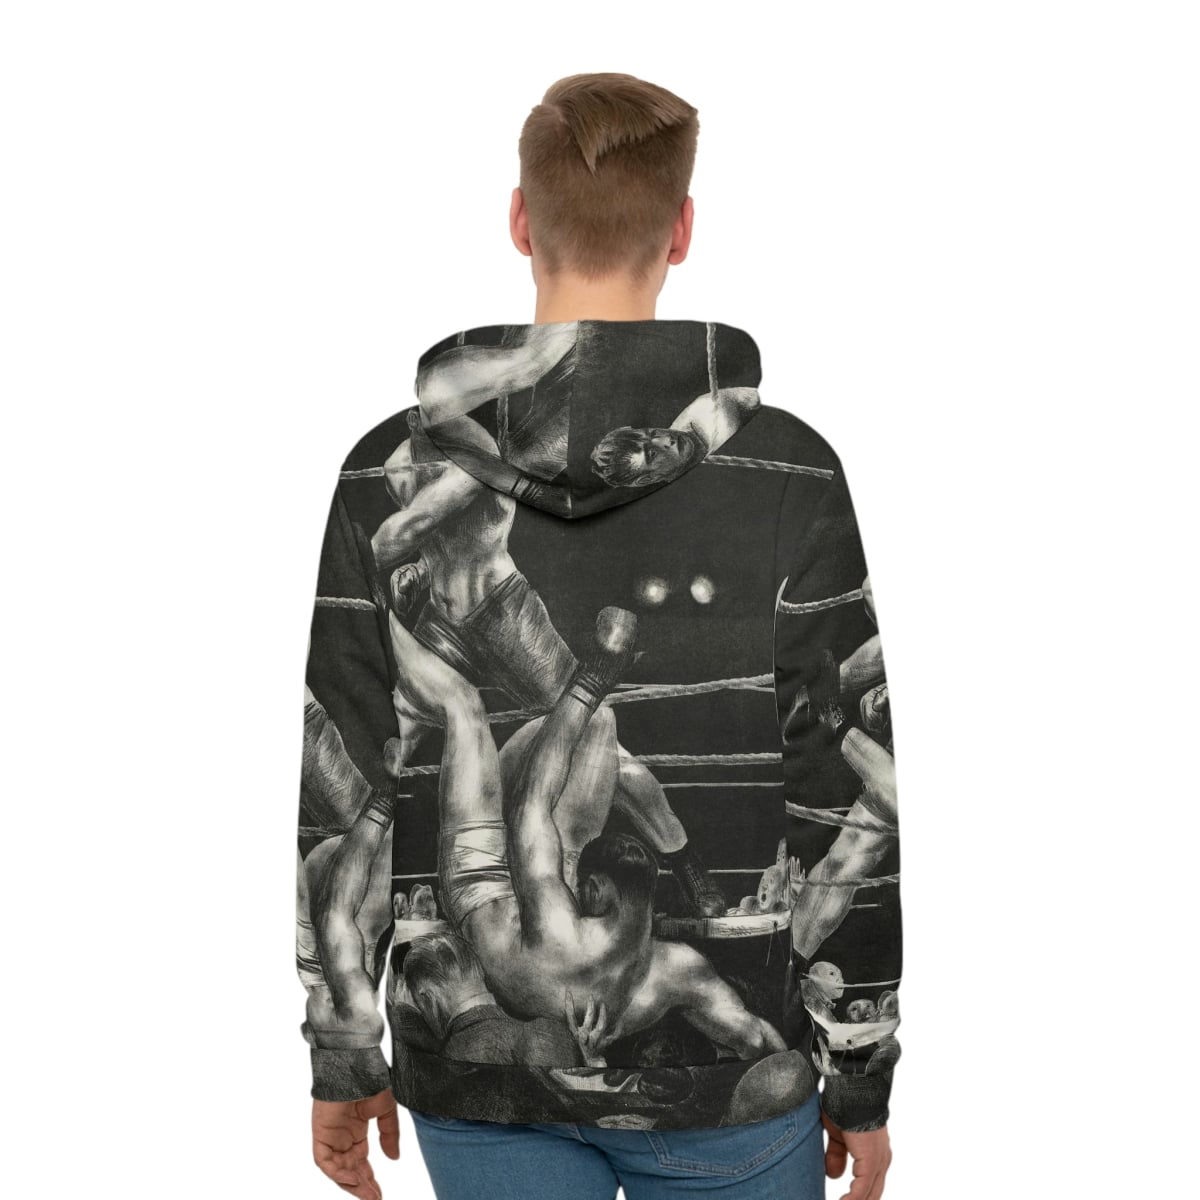 Dempsey and Firpo George Bellows Boxing Art Hoodie